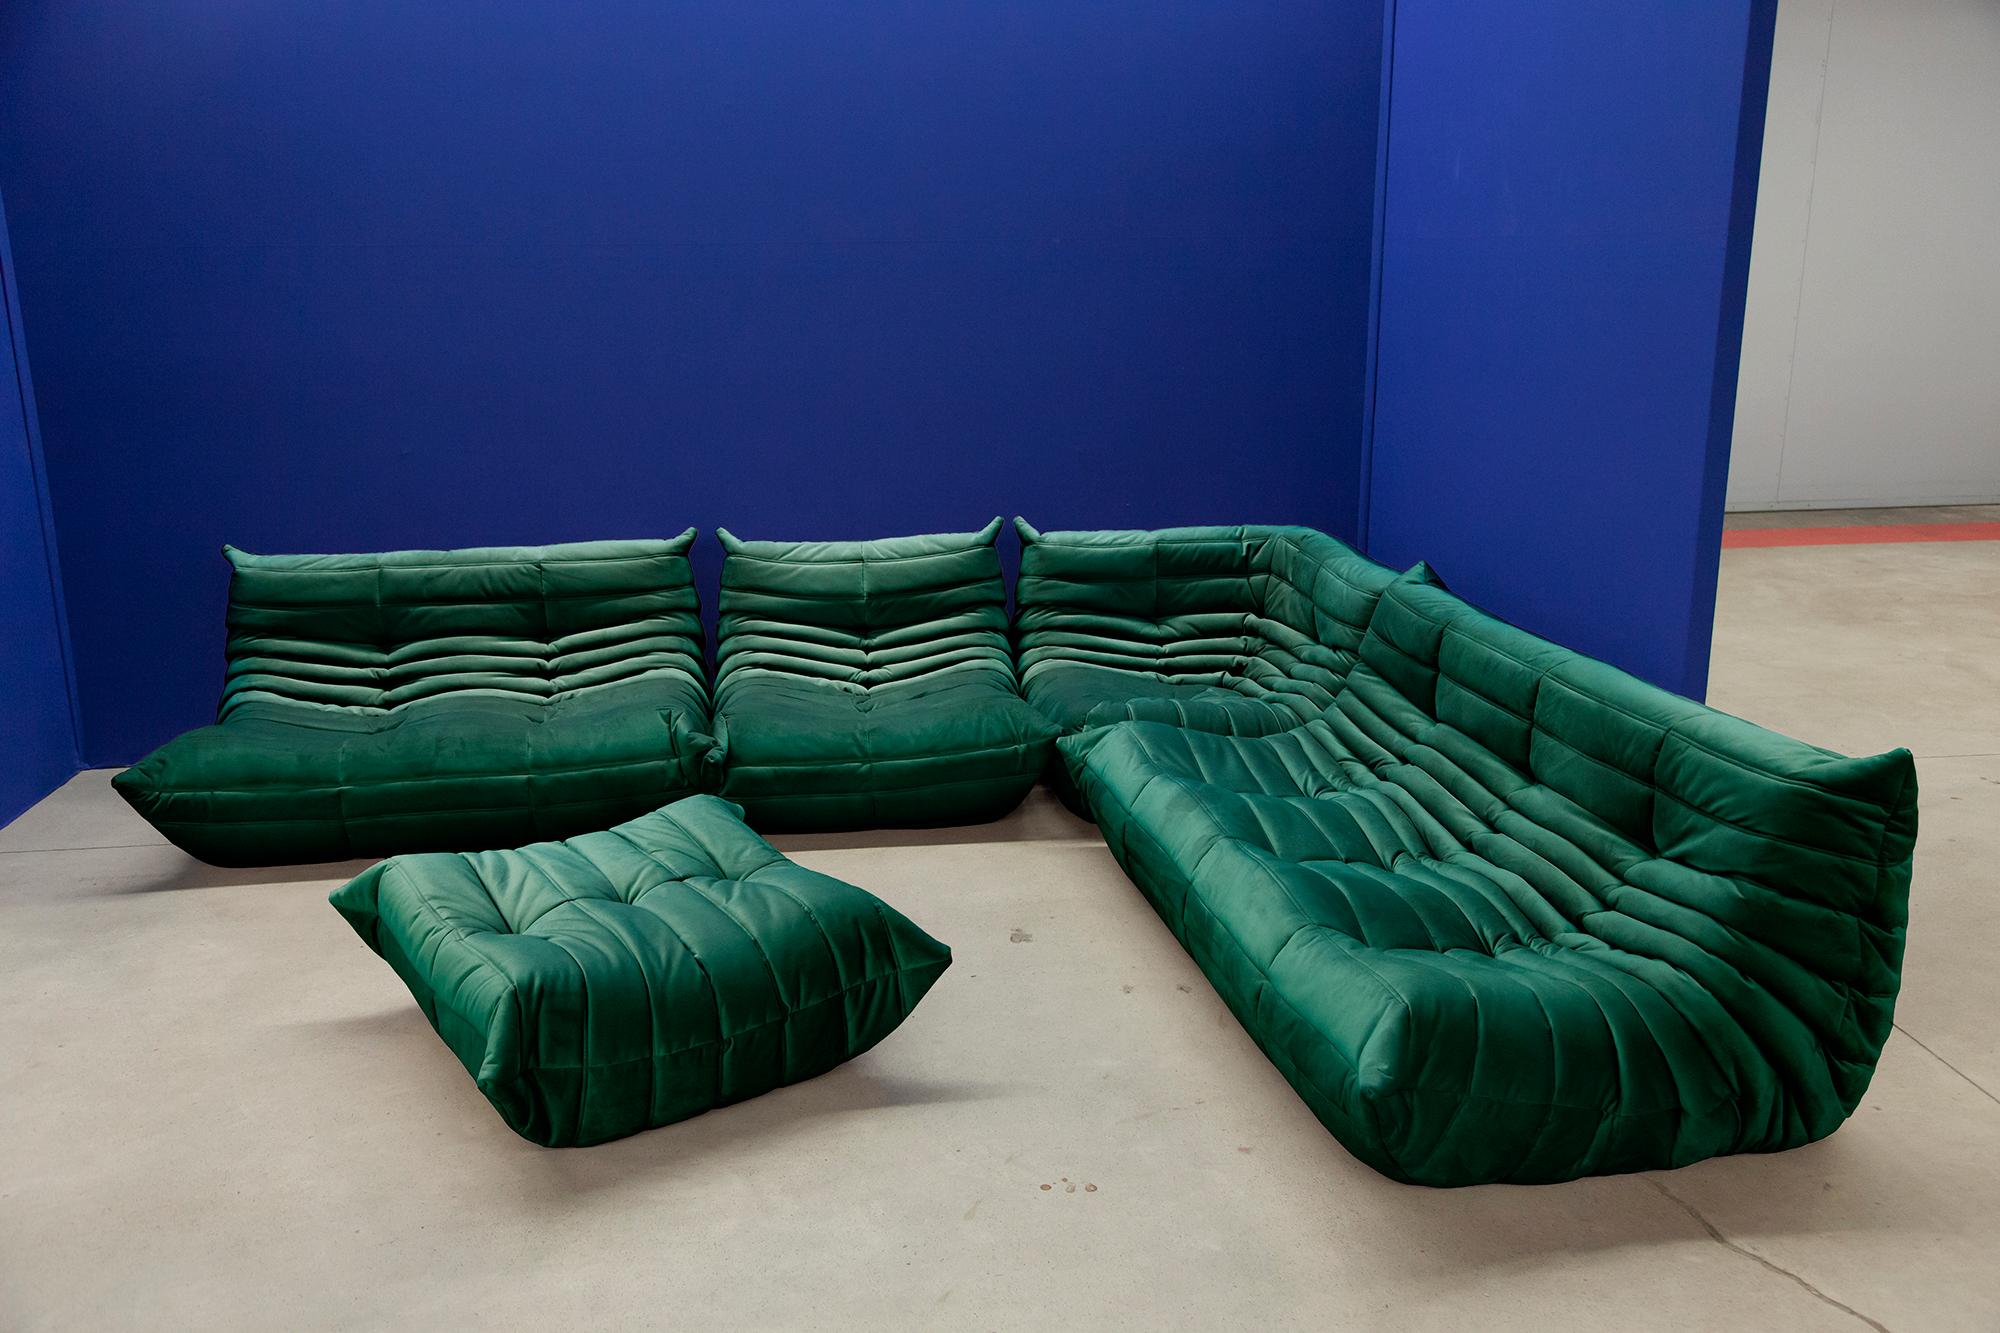 This Togo living room set was designed by Michel Ducaroy in 1974 and was manufactured by Ligne Roset in France. Each piece has the original Ligne Roset logo and genuine bottom. It has been reupholstered in genuine high quality bottle green velvet